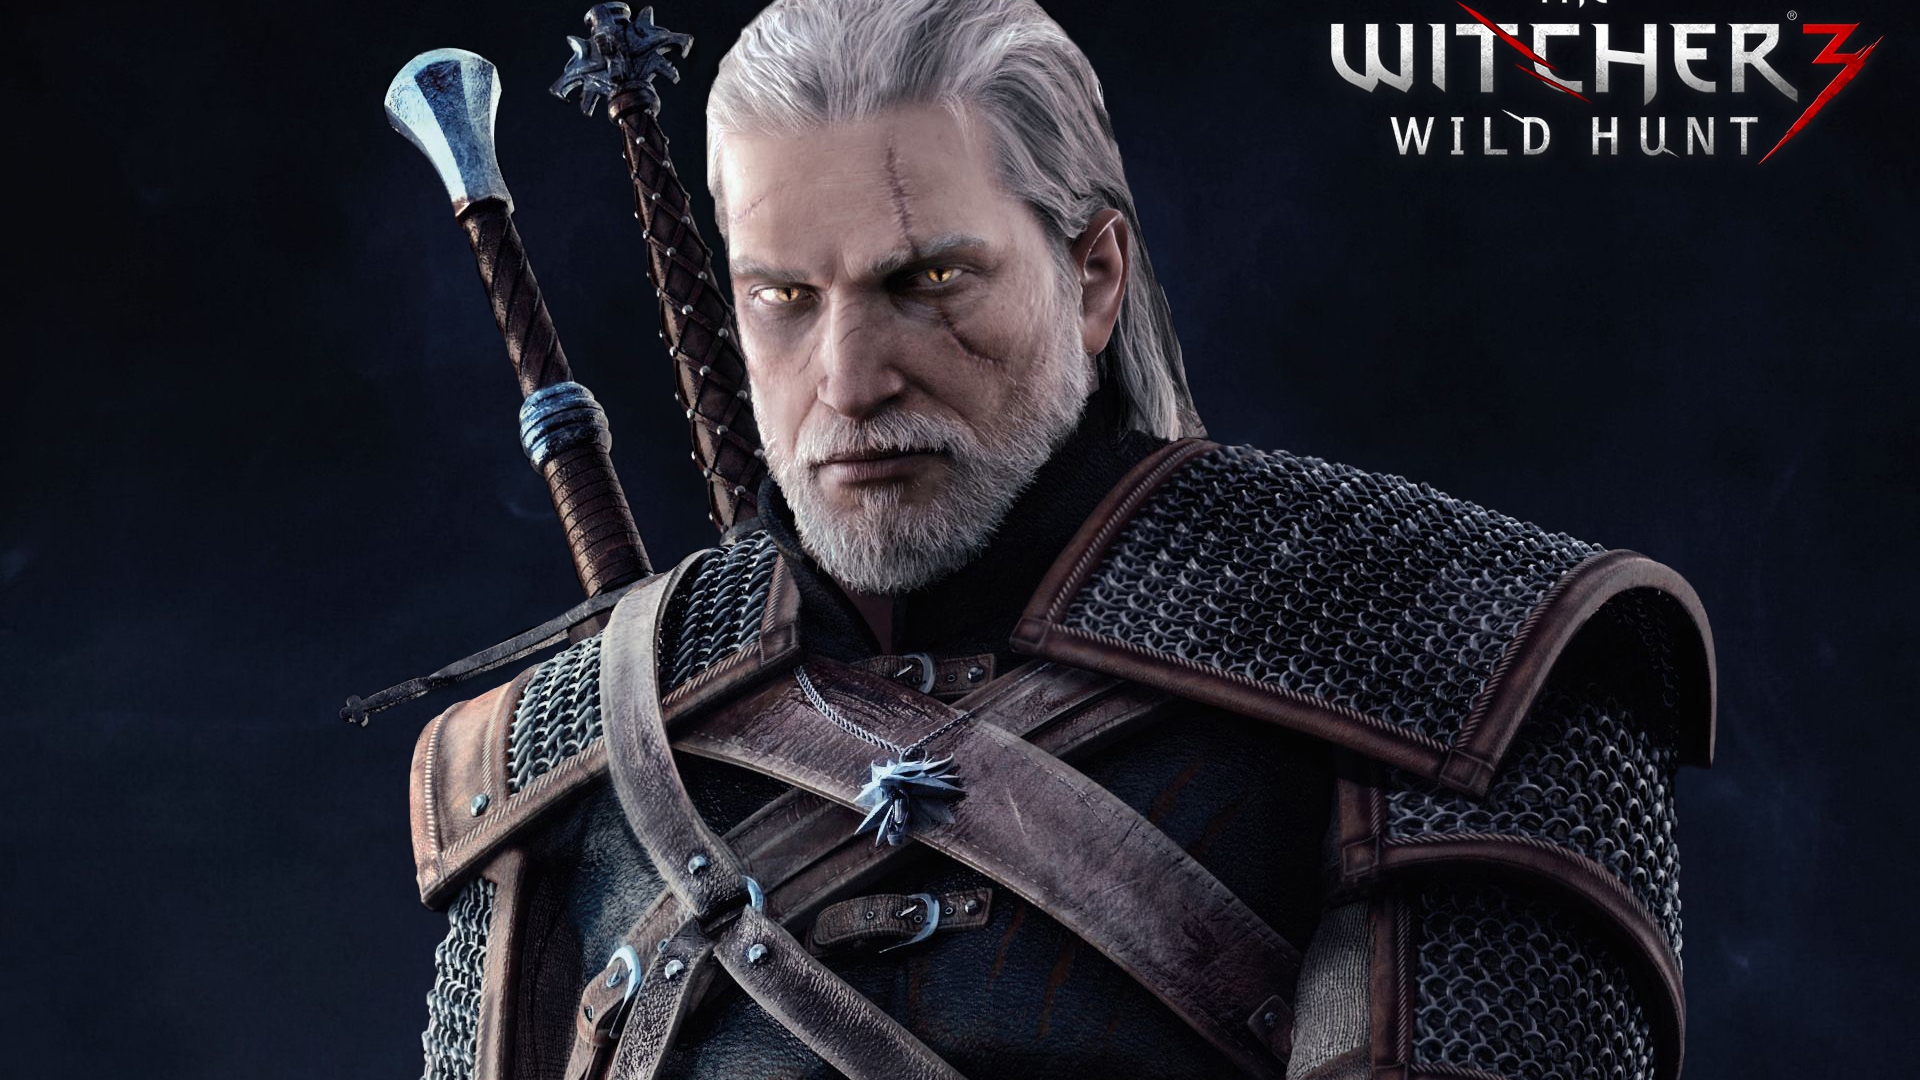 The Witcher 3 Wild Hunt Game for 1920 x 1080 HDTV 1080p resolution